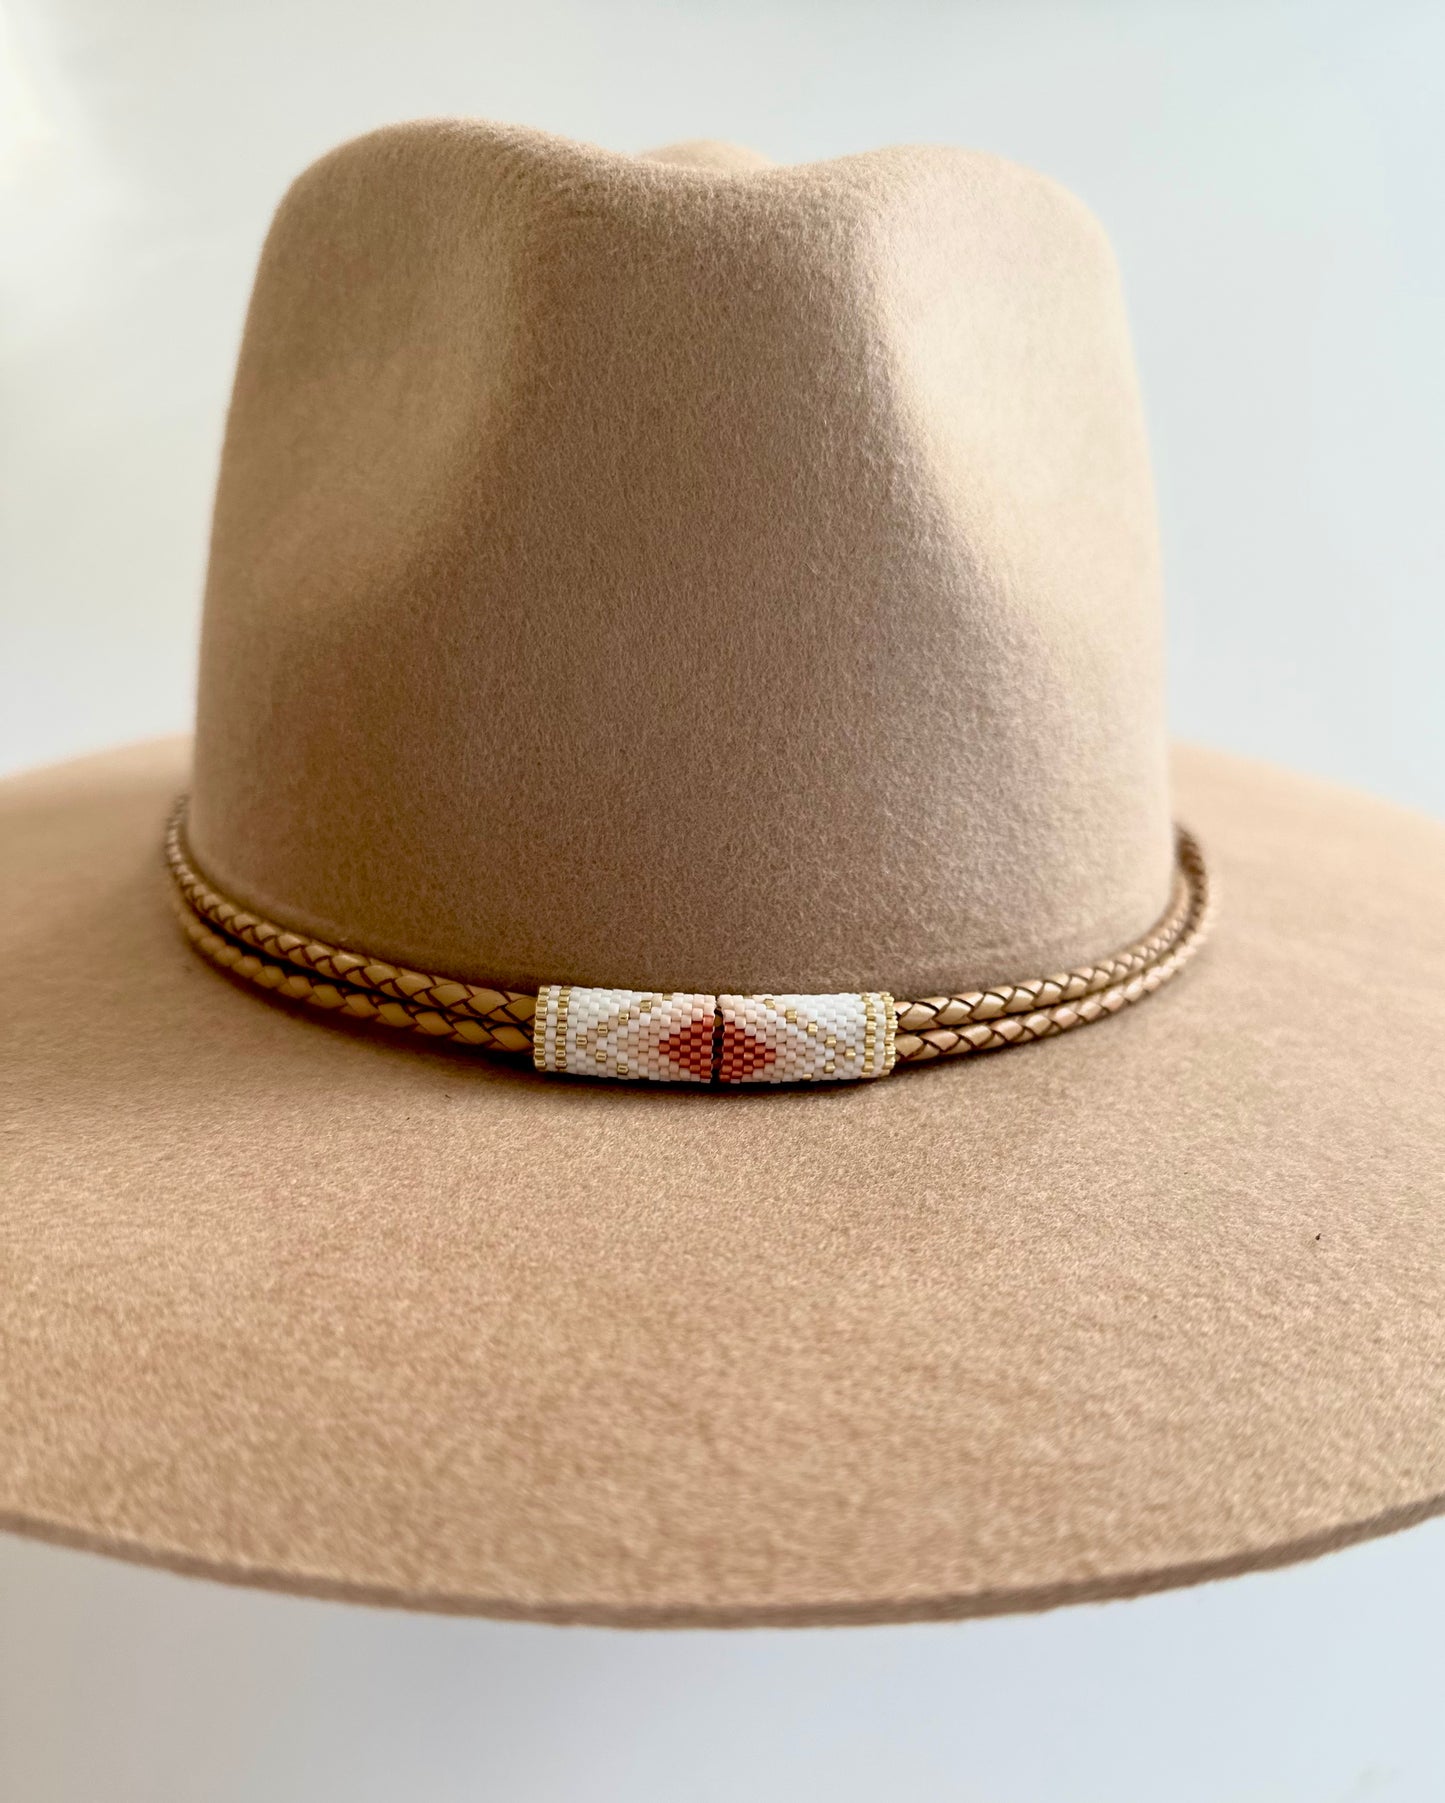 Leather Hatband - Pink and Black